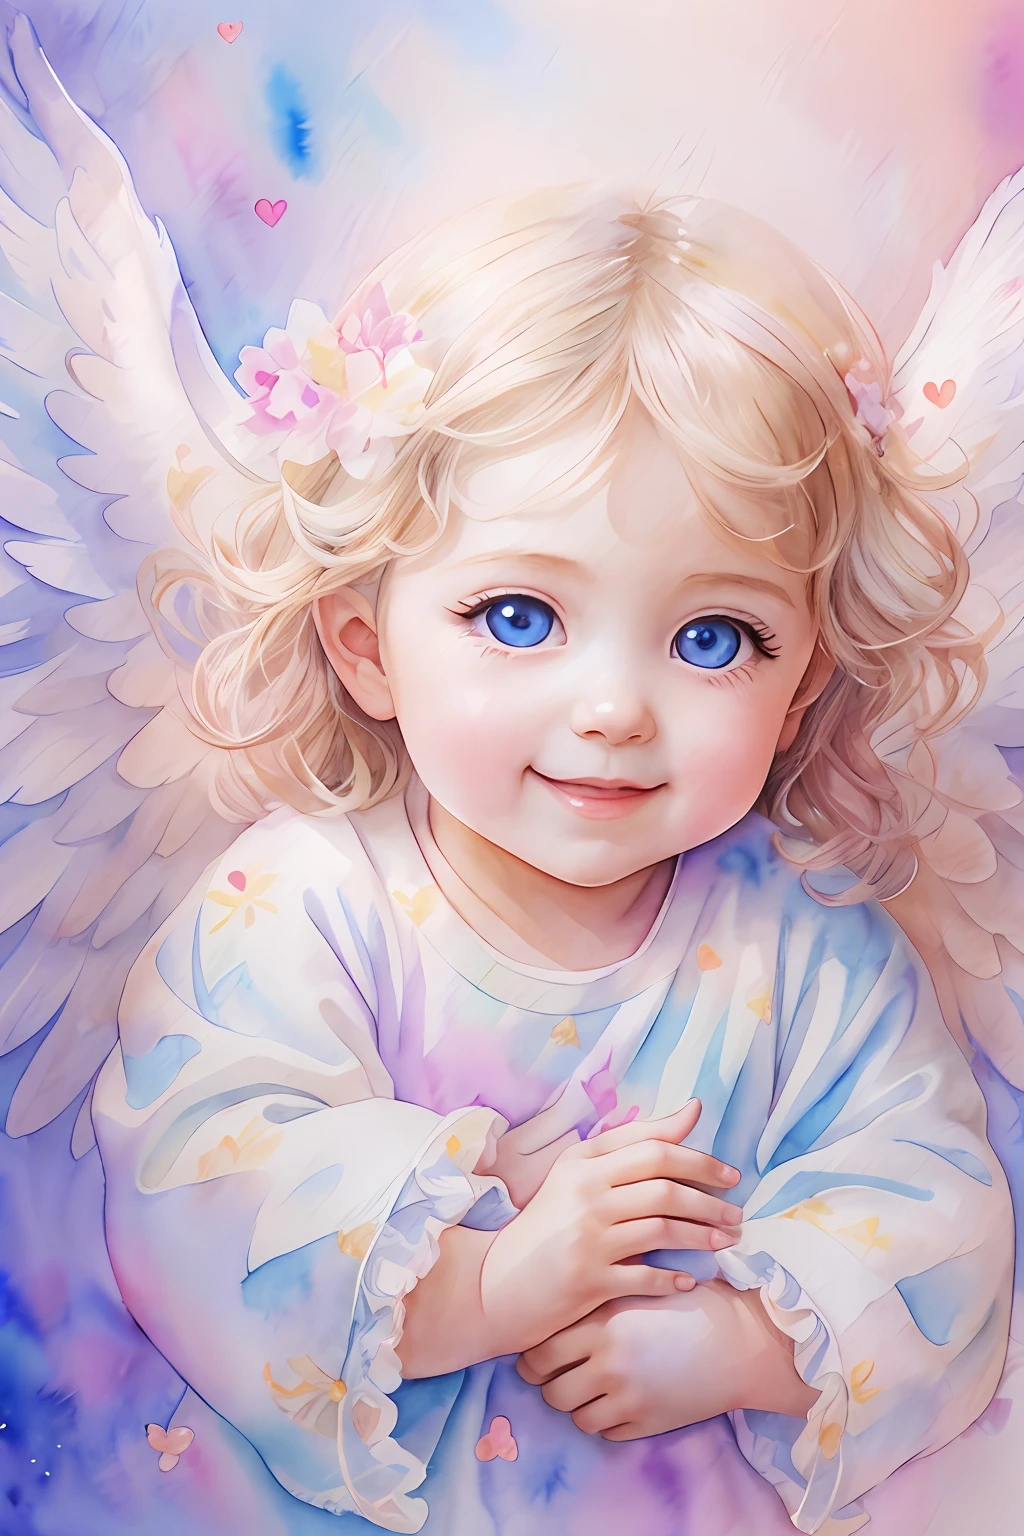 Blessings of Angels､Bright background、heart mark、tenderness､A smile、Gentle､Baby Angel、watercolor paiting、blue eyess